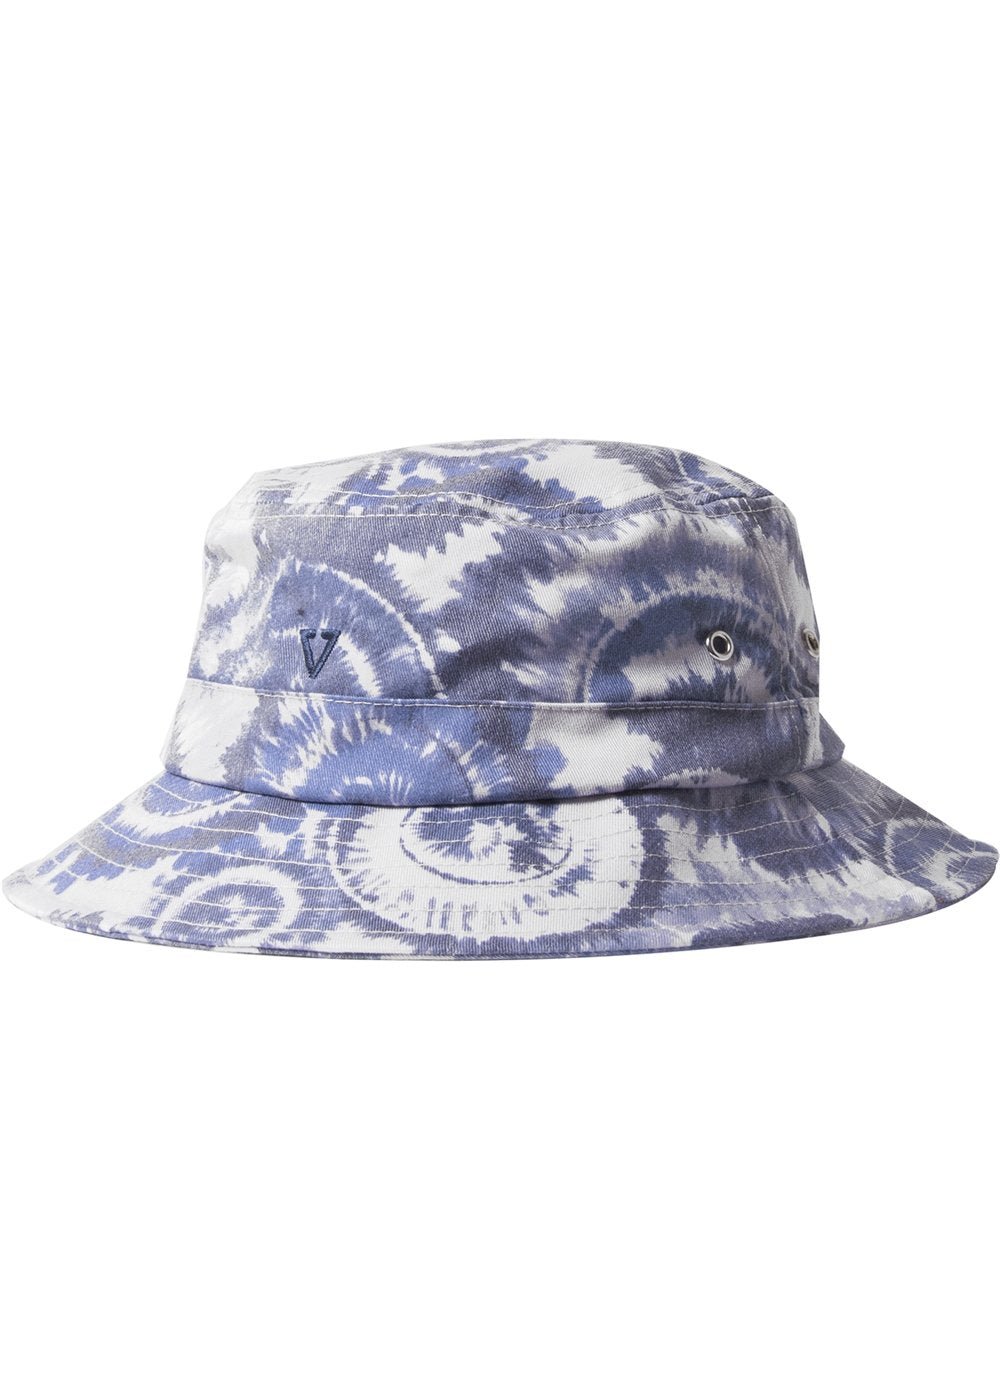 Shred Head Bucket Hat-PCB - Stoke Outlets